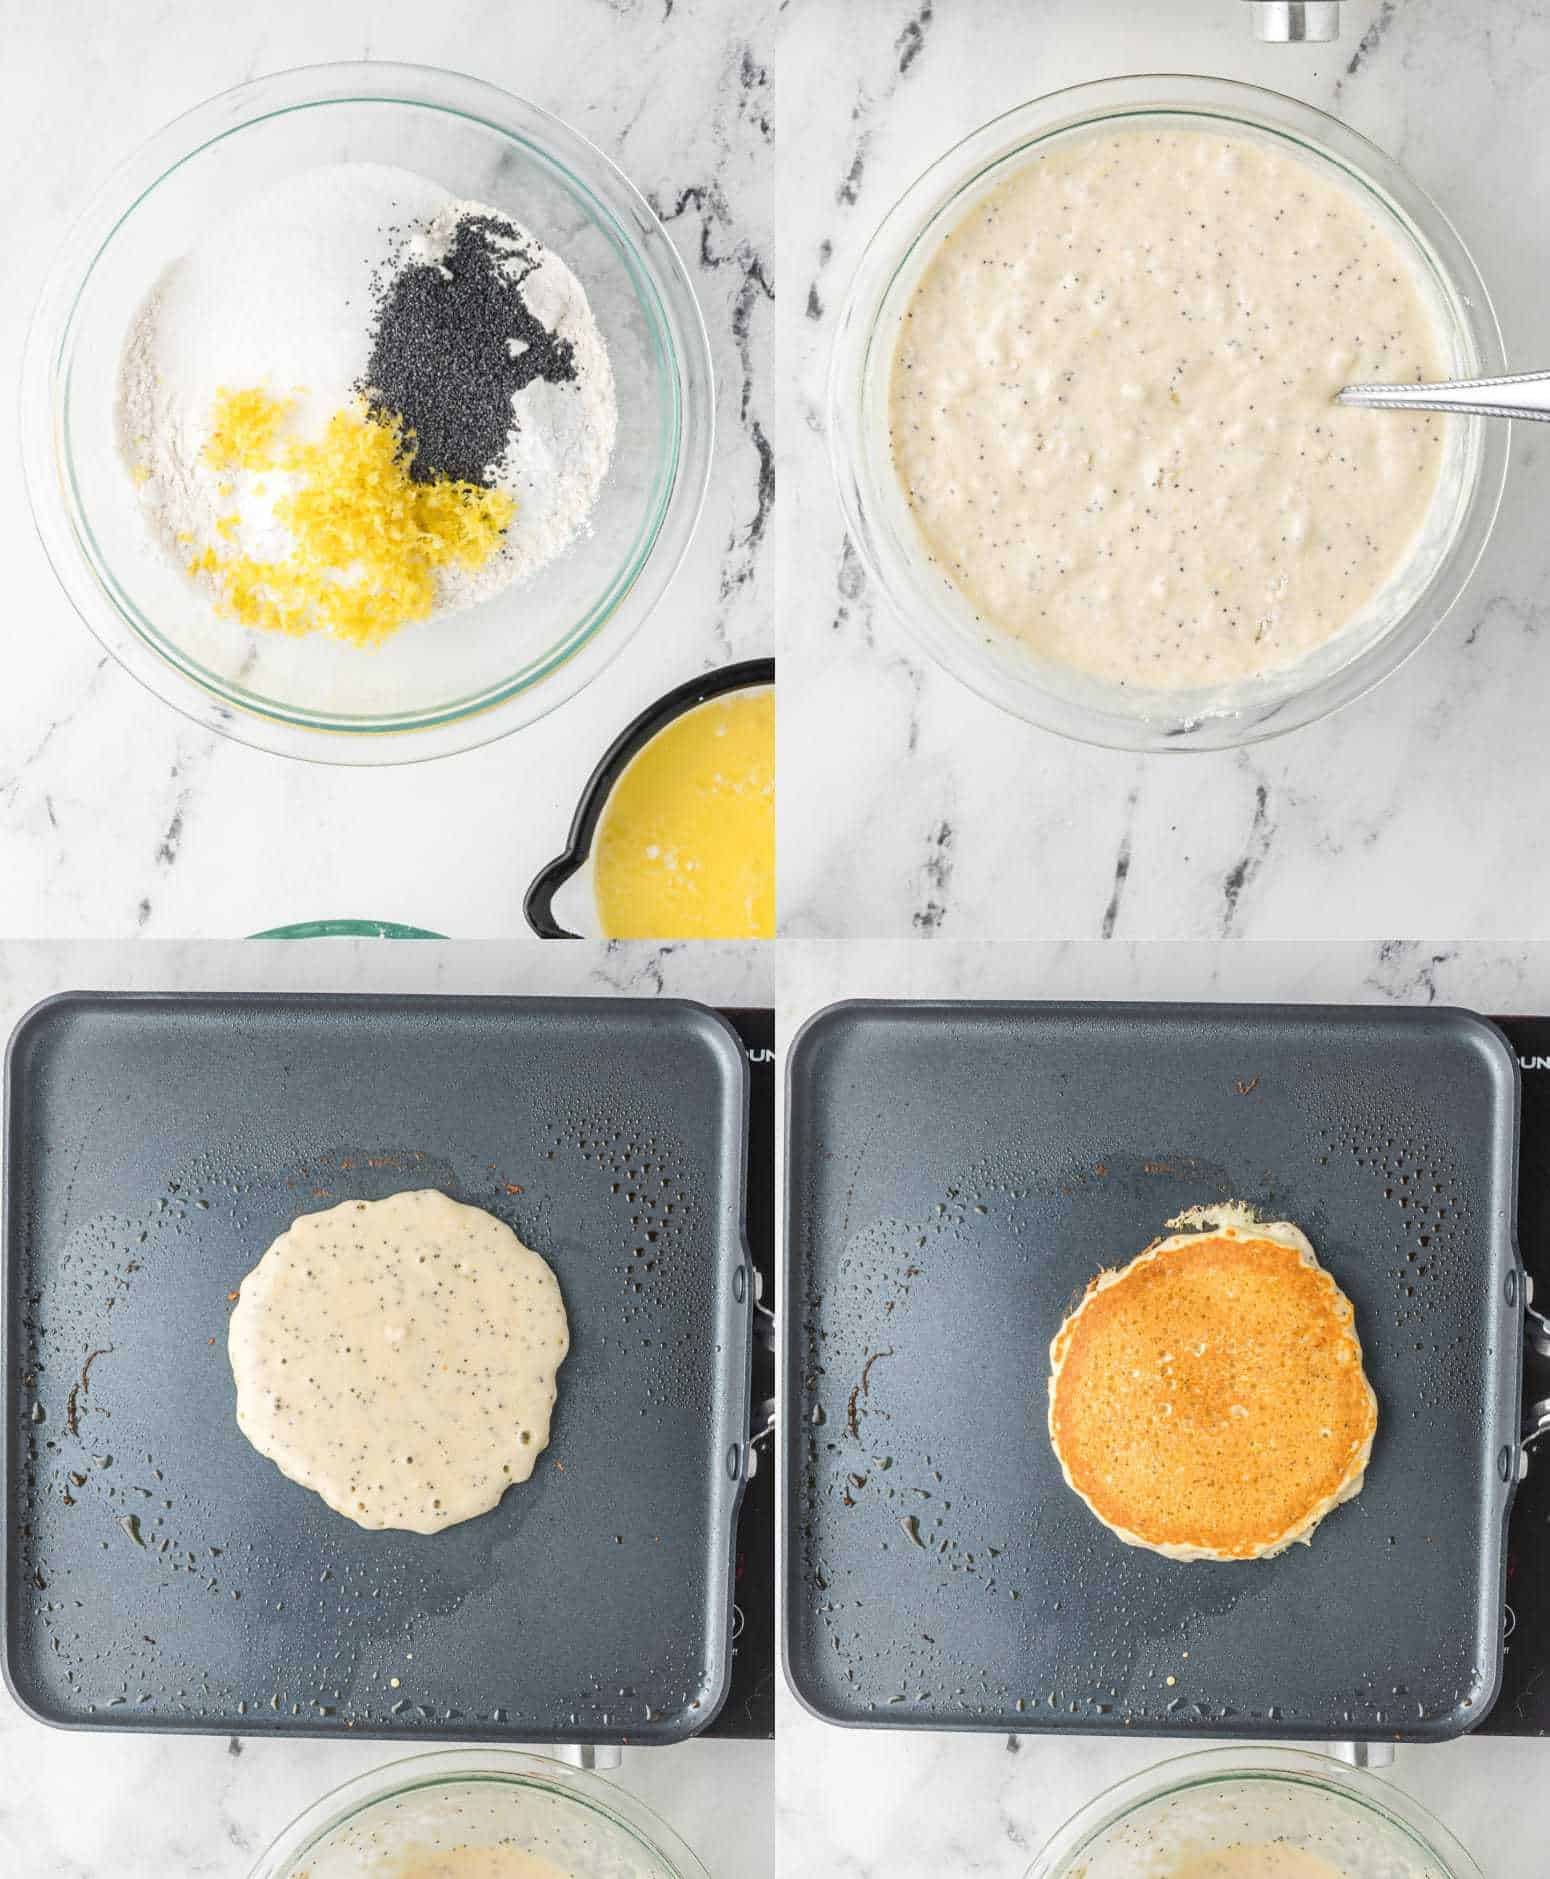 Four process photos. First one, dry pancake ingredients in a bowl. Second one, wet ingredients mixed into the dry. Third one, pancake poured onto a griddle. Fourth one, pancake that has been flipped. 